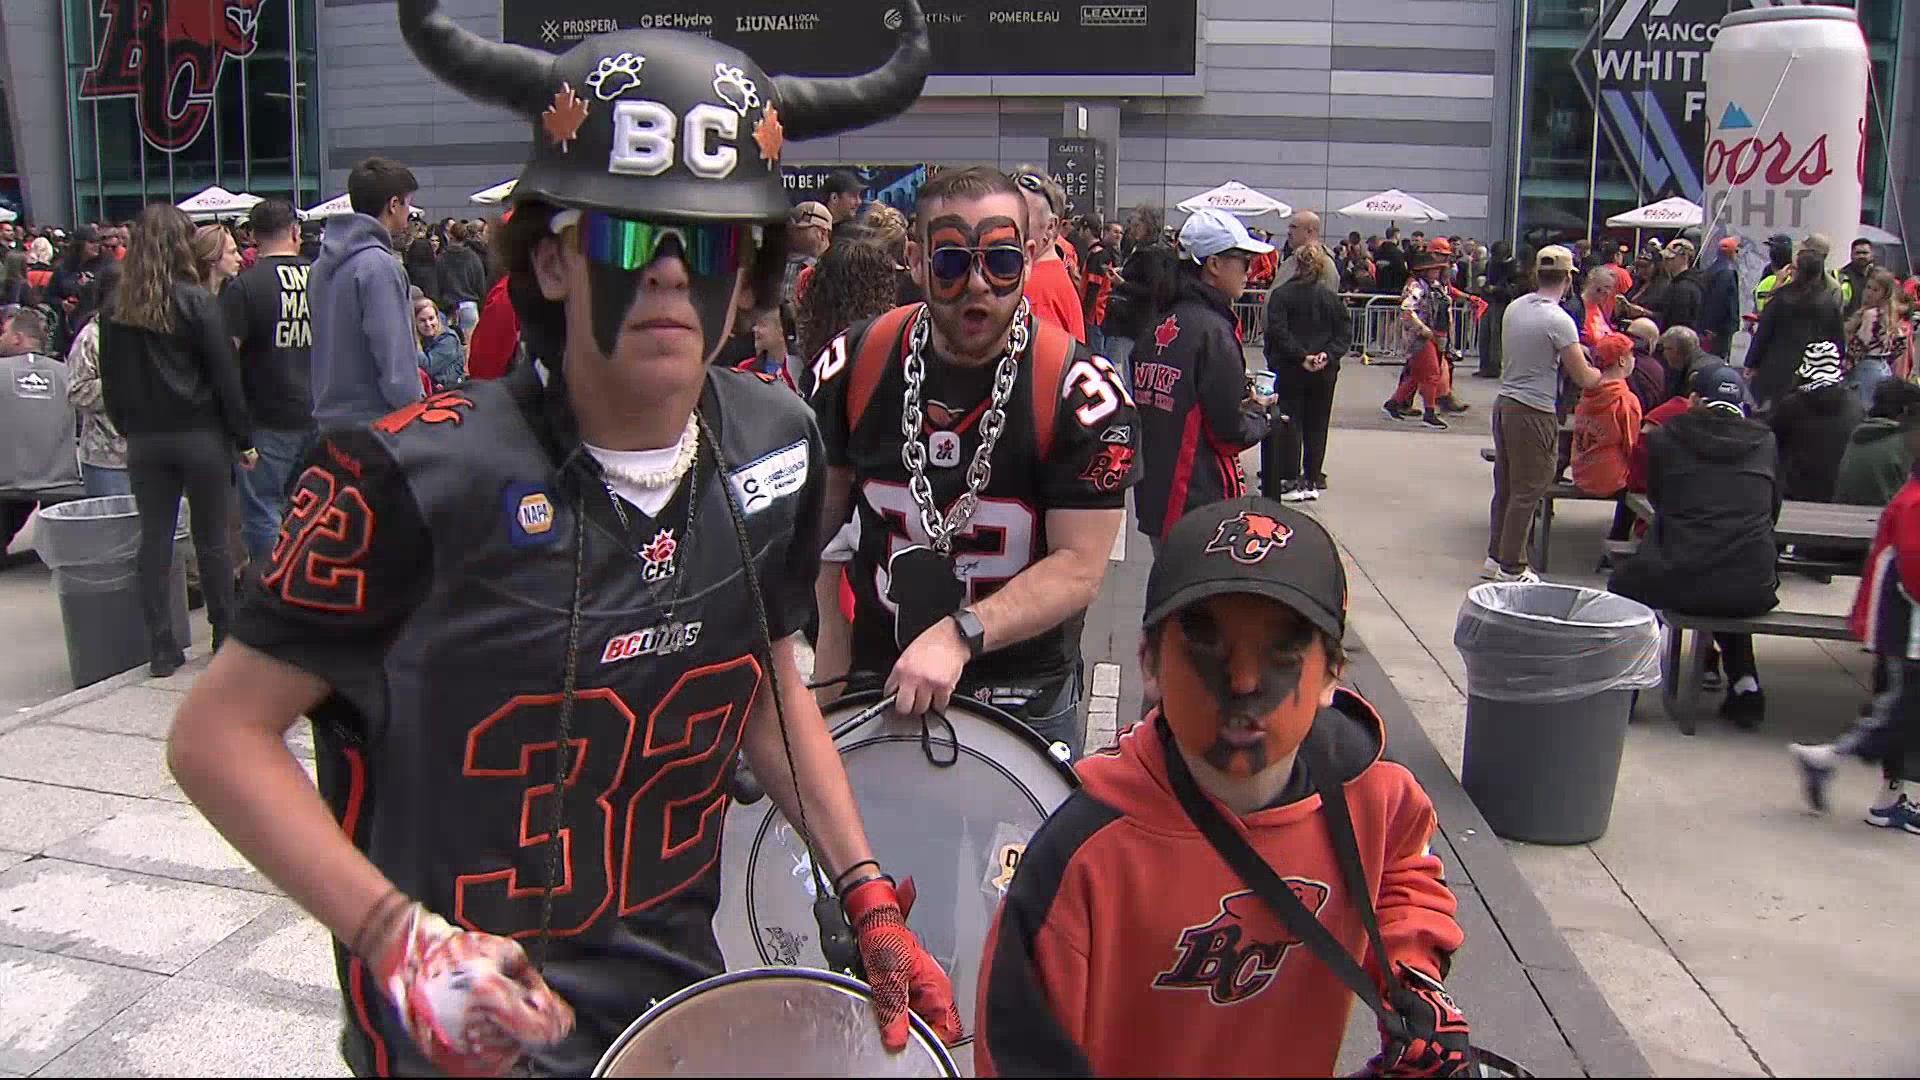 BC Lions fans share excitement before home opener and 50 Cent performance